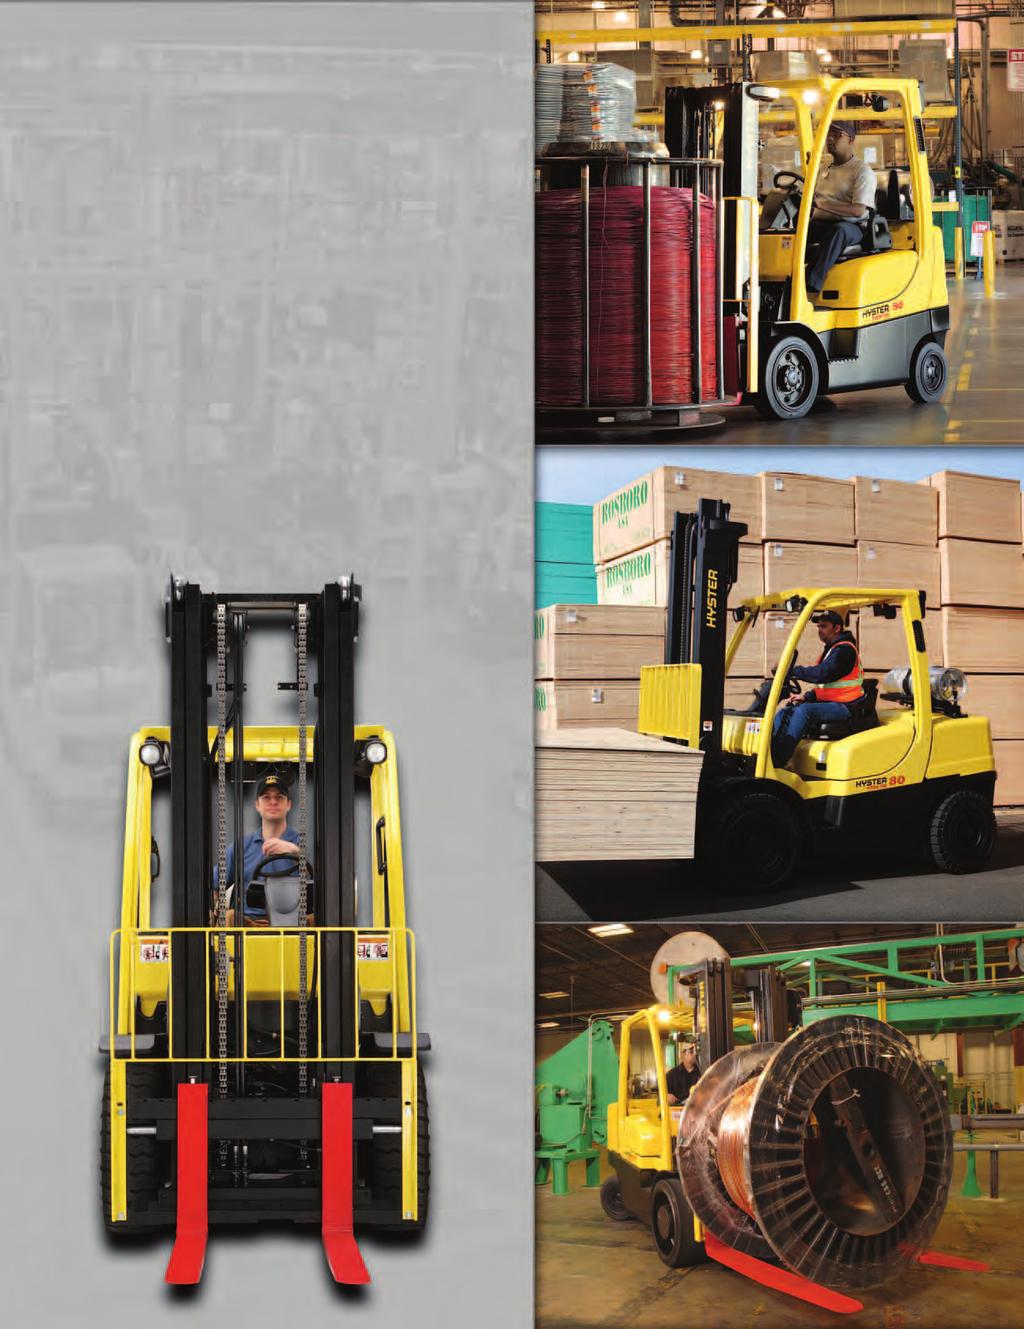 HYSTER TRUCK SERIES Hyster Company s history is characterized by an unmatched legacy of continuous innovation, superior market responsiveness, and a commitment to build the toughest lift trucks in